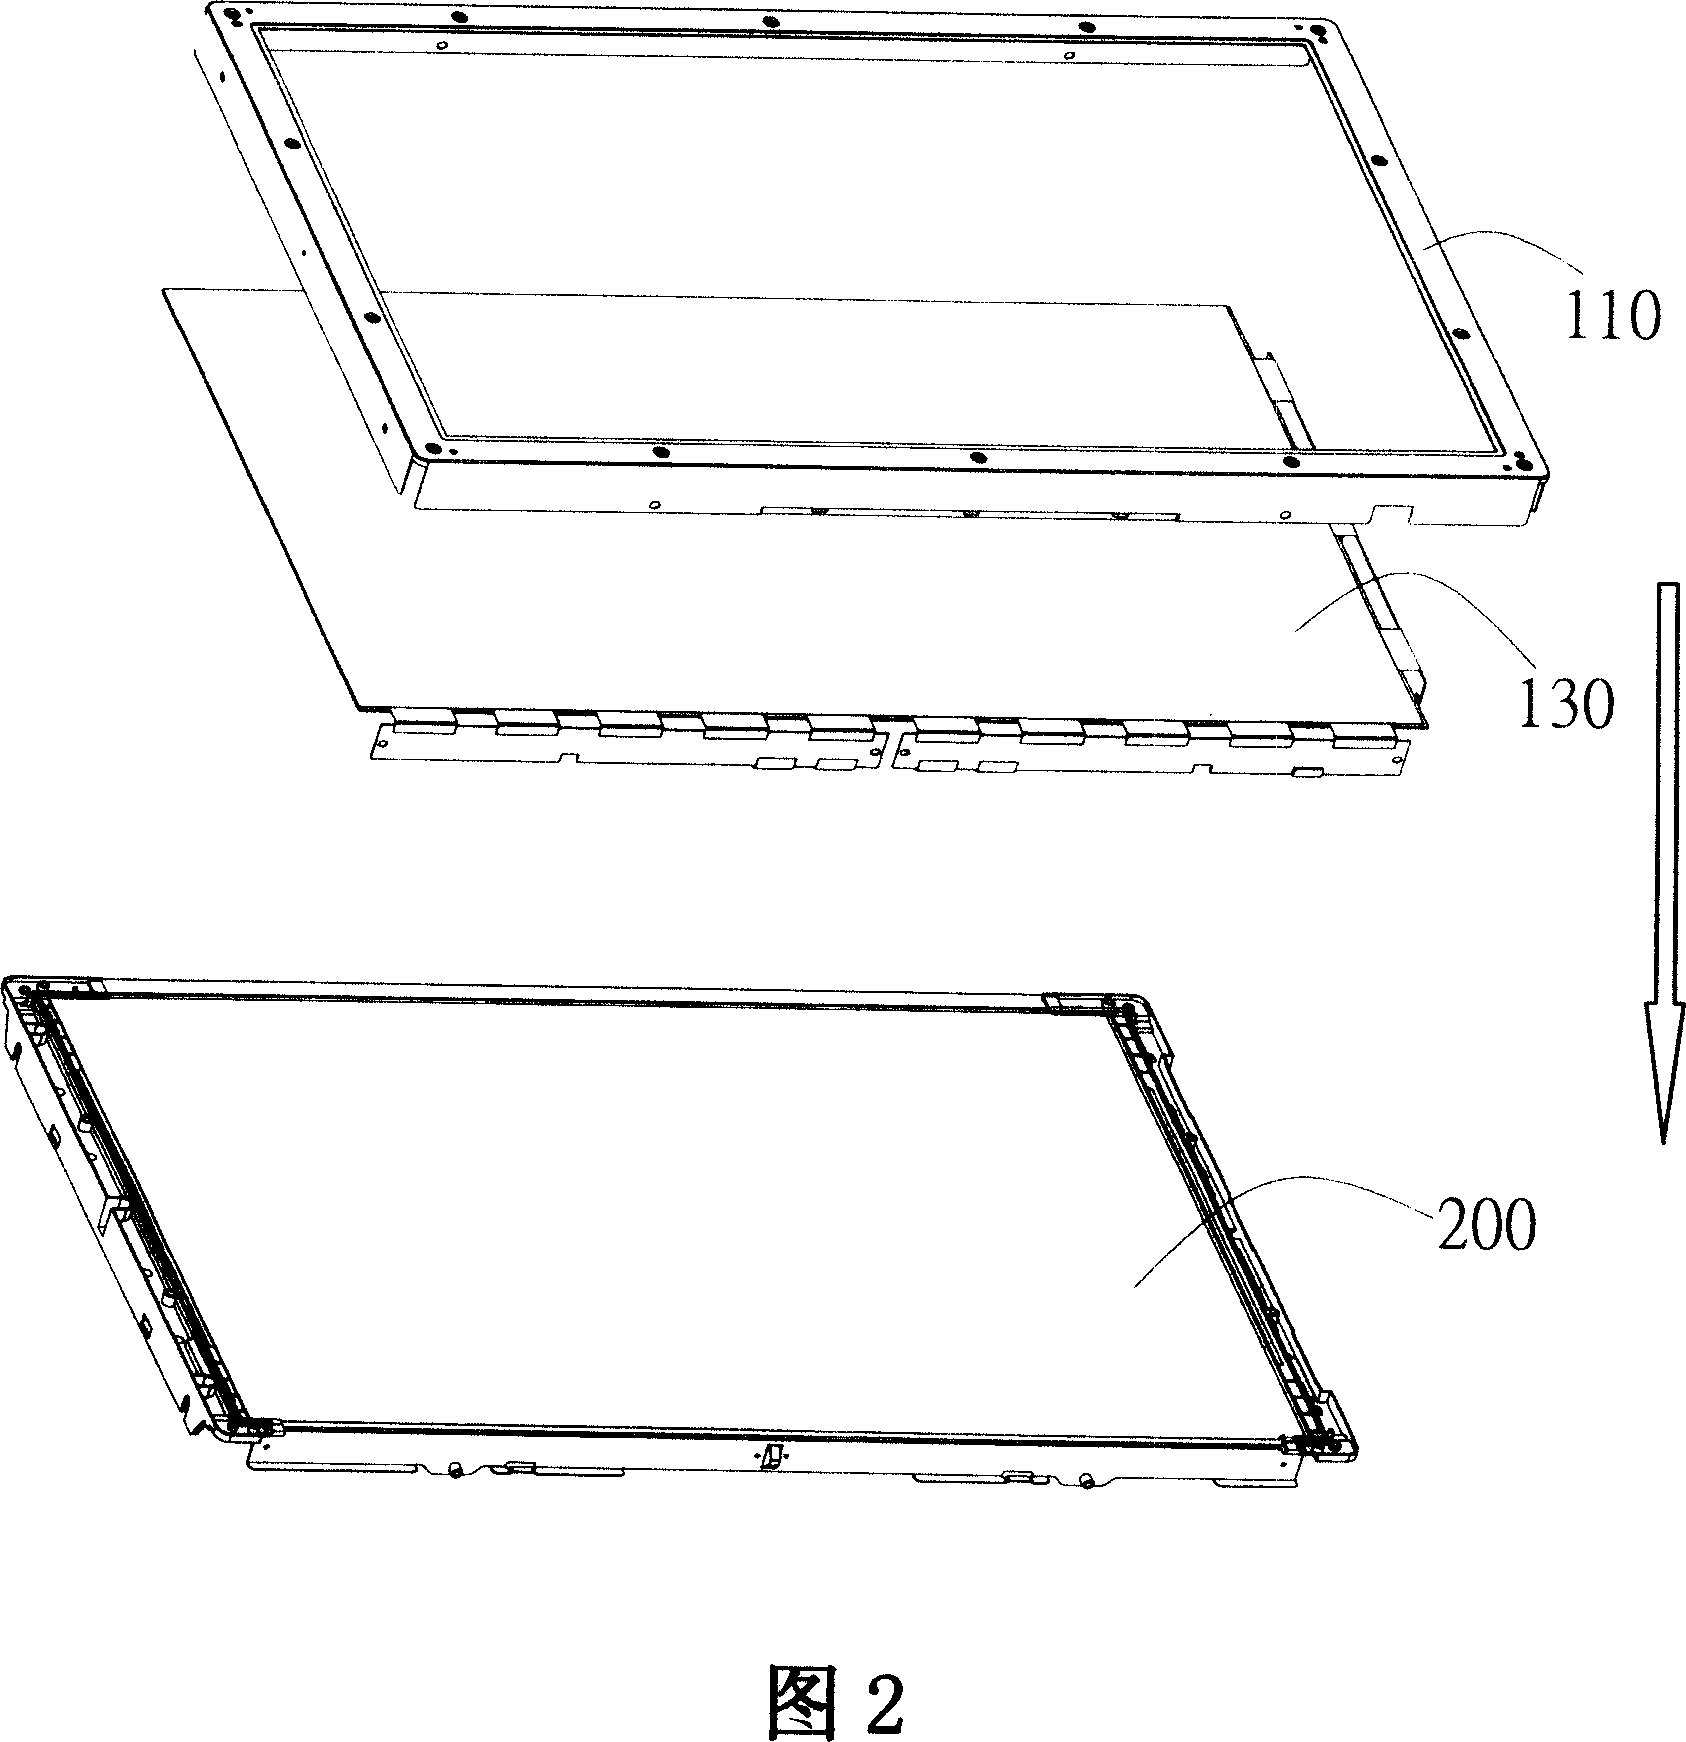 Backlight module and diffusion board structure used thereby